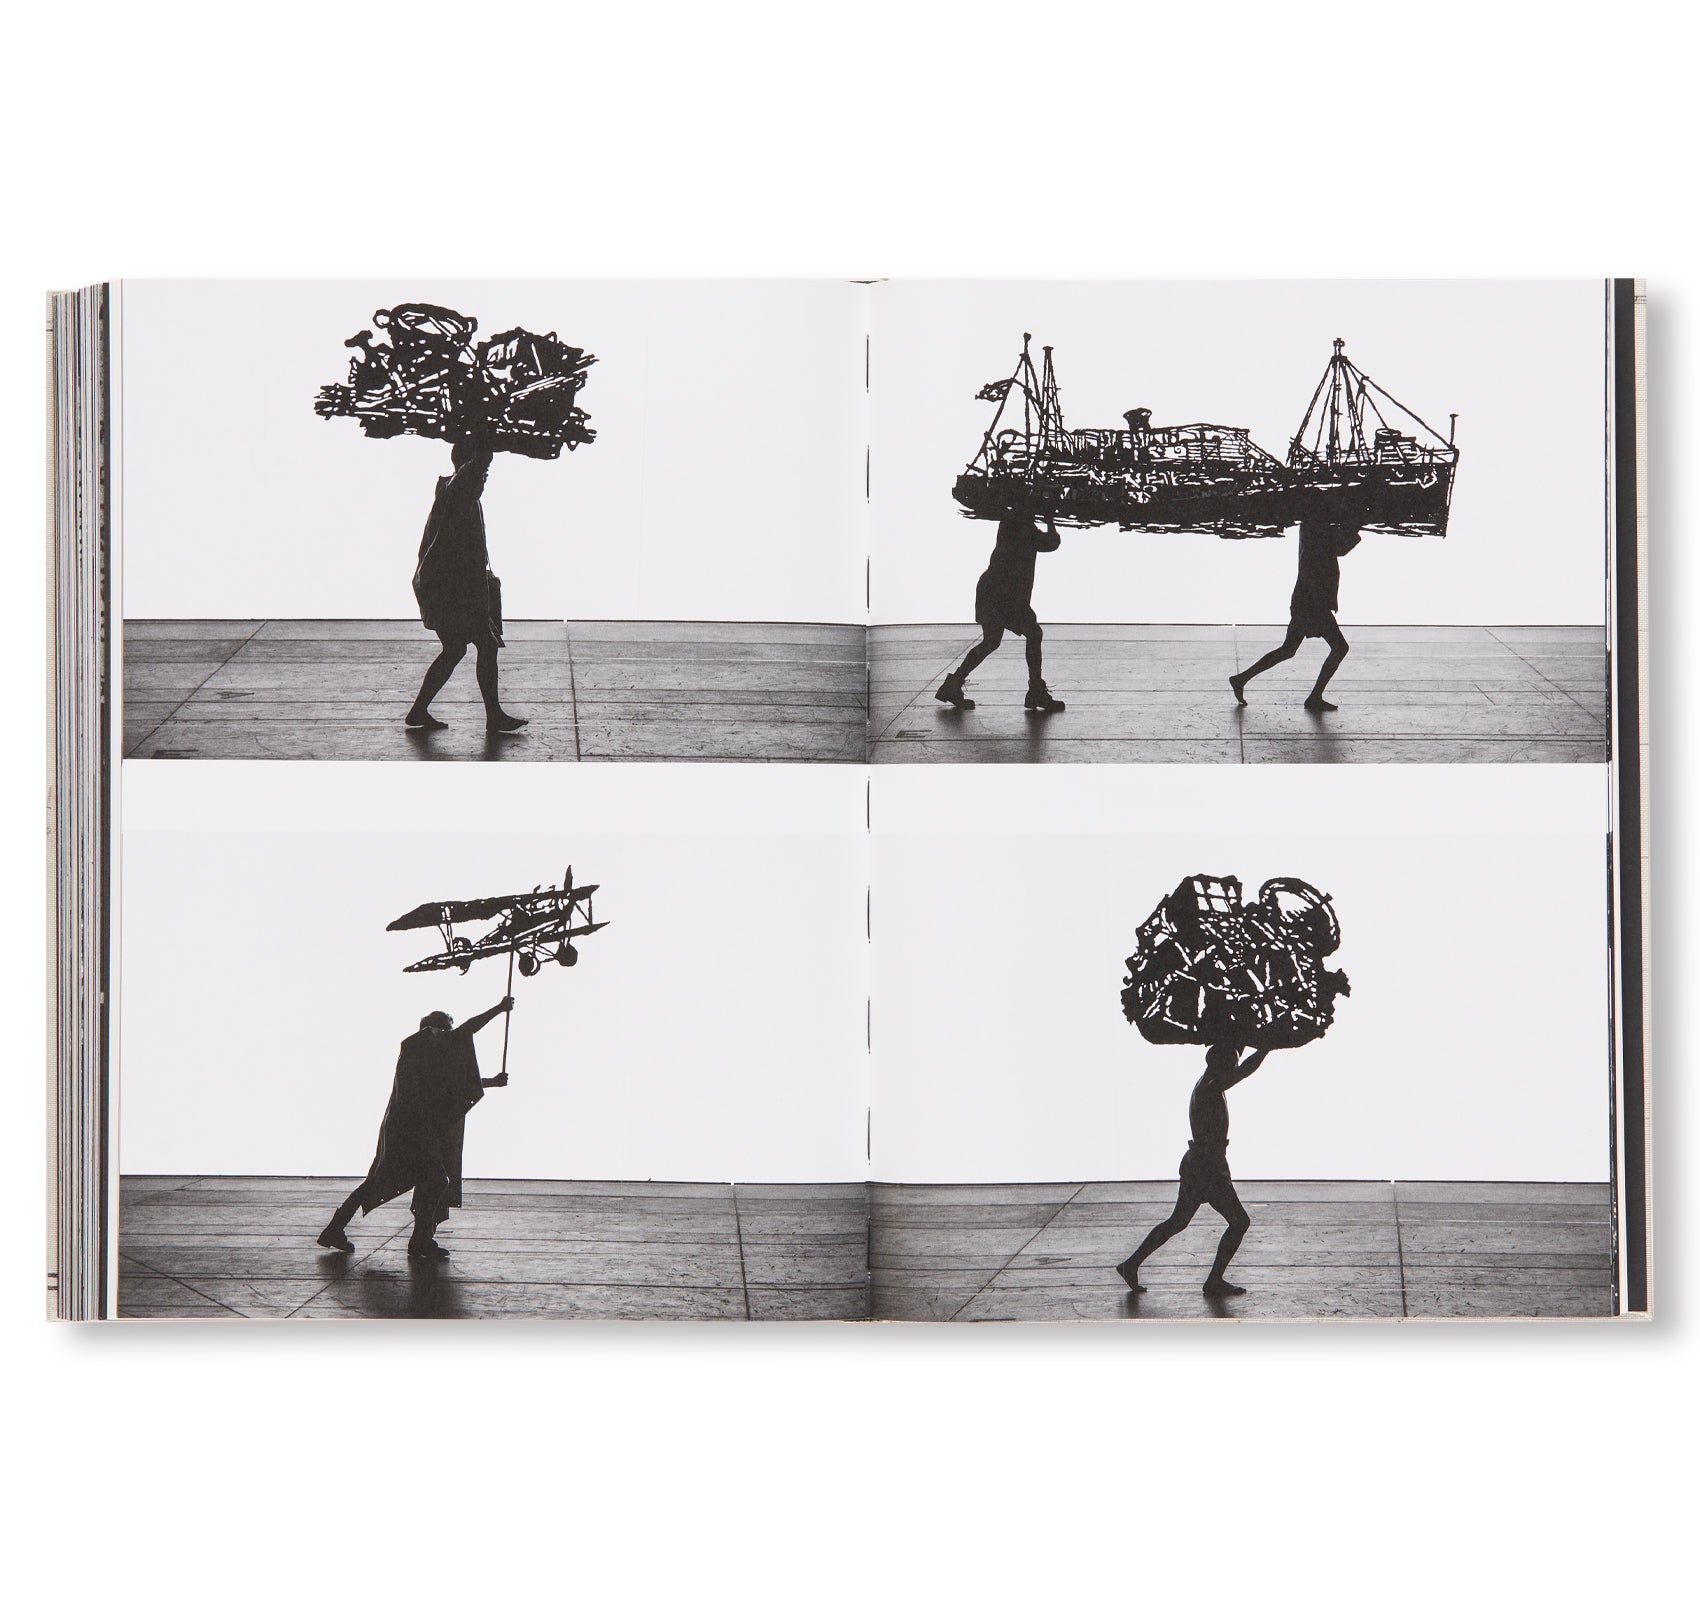 THE HEAD & THE LOAD ARE THE TROUBLE OF THE NECK by William Kentridge